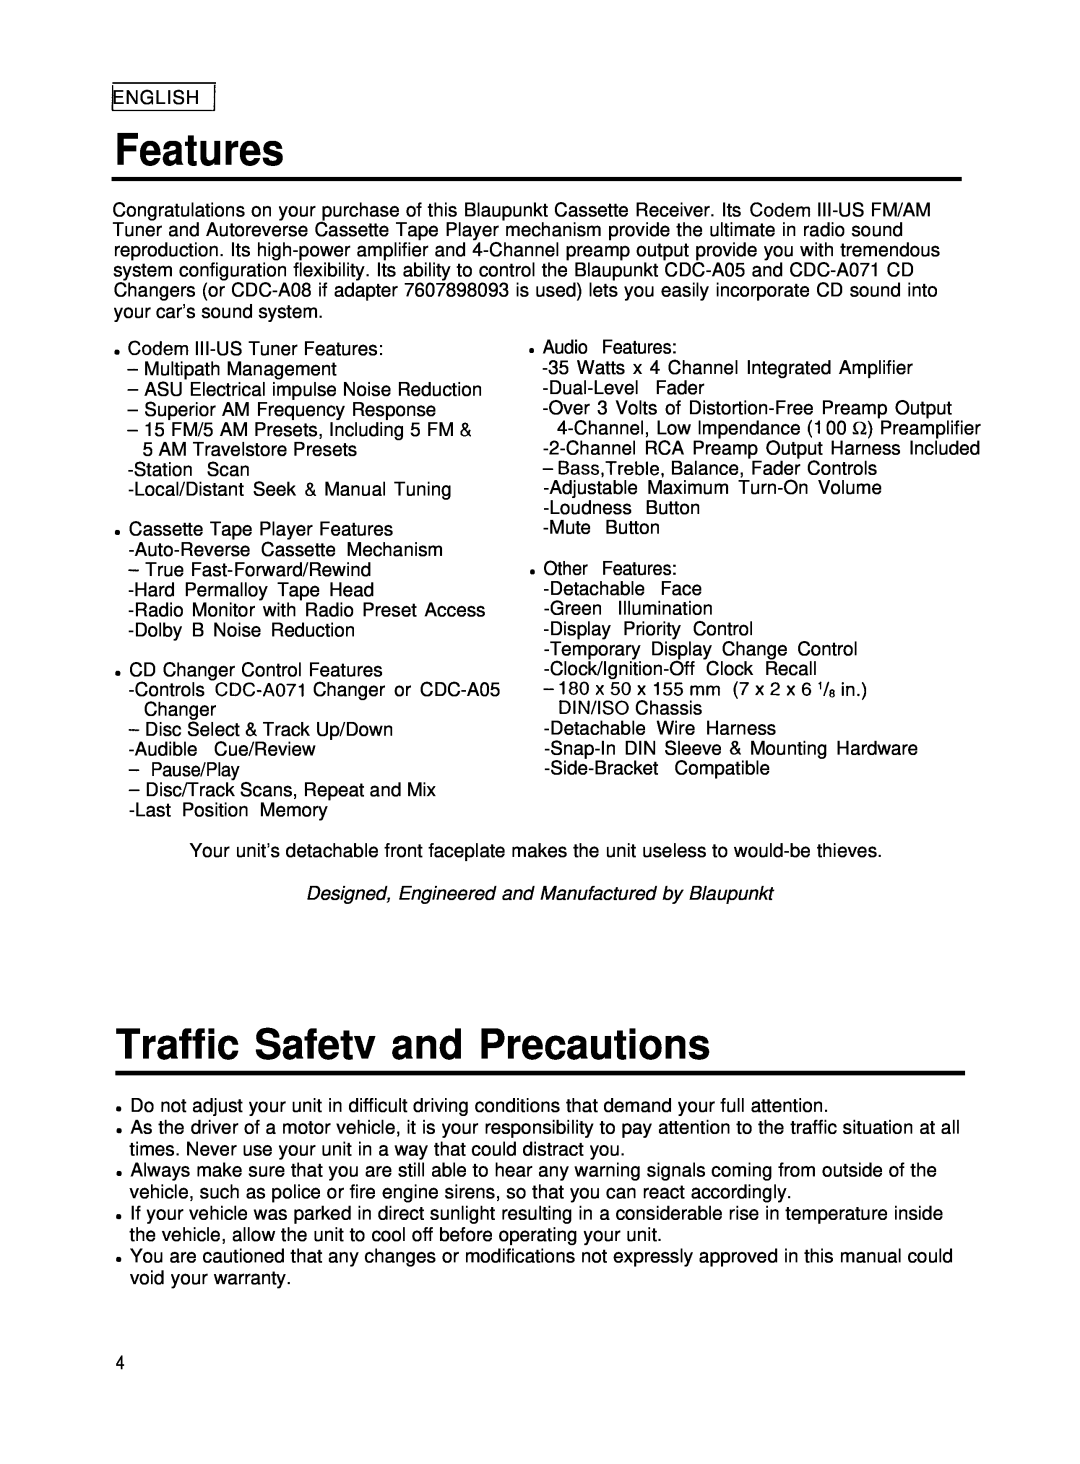 Blaupunkt CR67 manual Features, Traffic Safetv and Precautions 